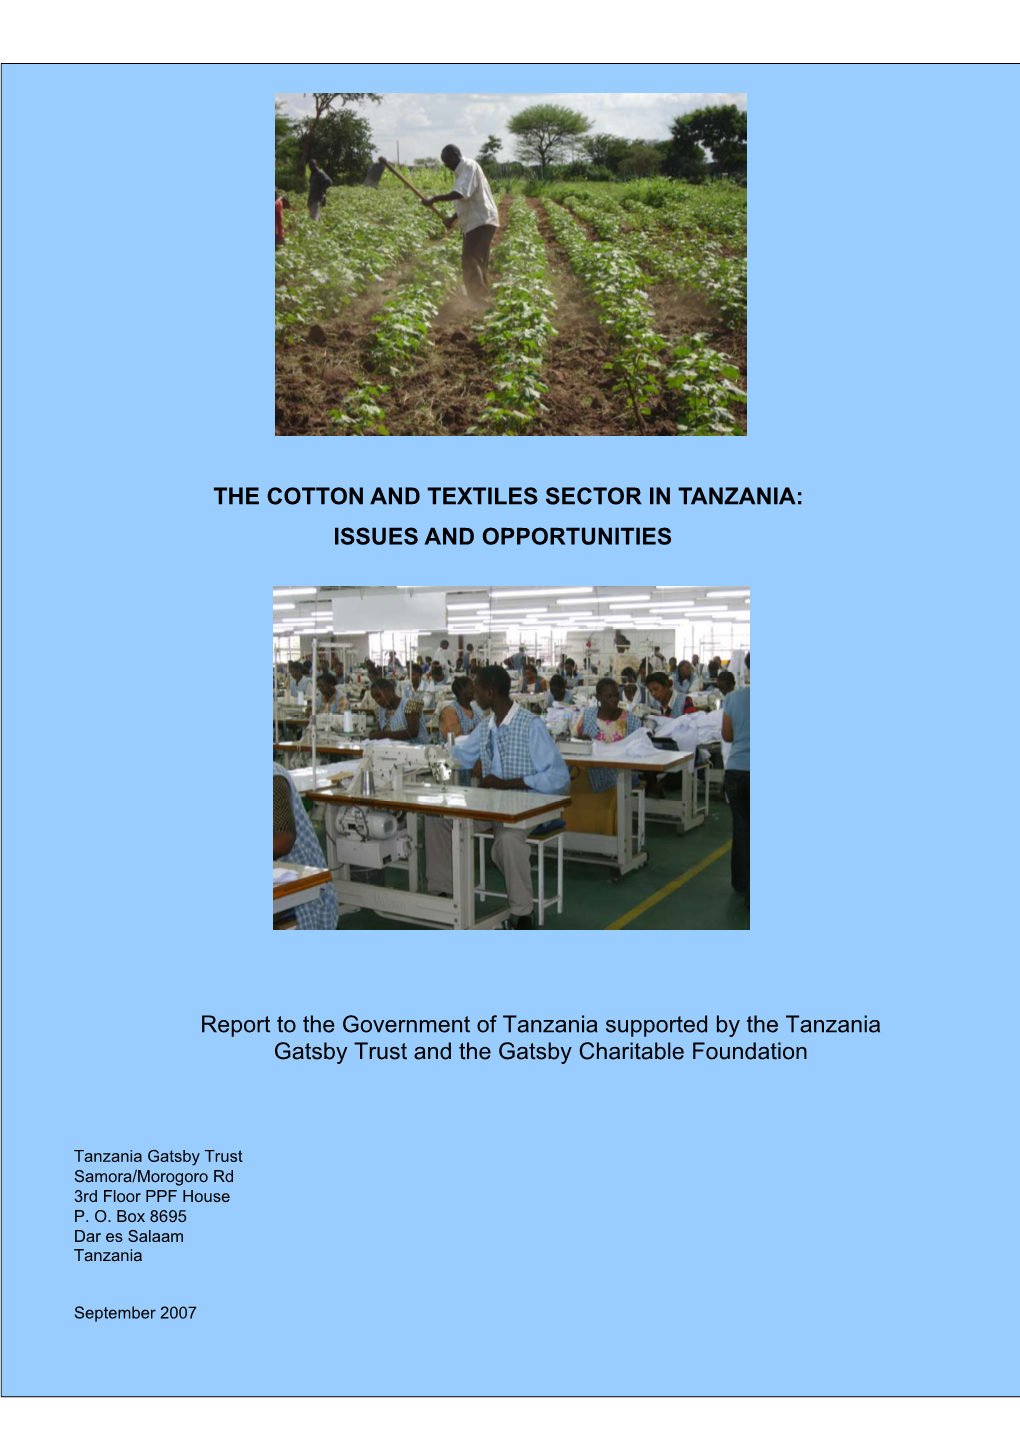 The Cotton and Textiles Sector in Tanzania: Issues and Opportunities